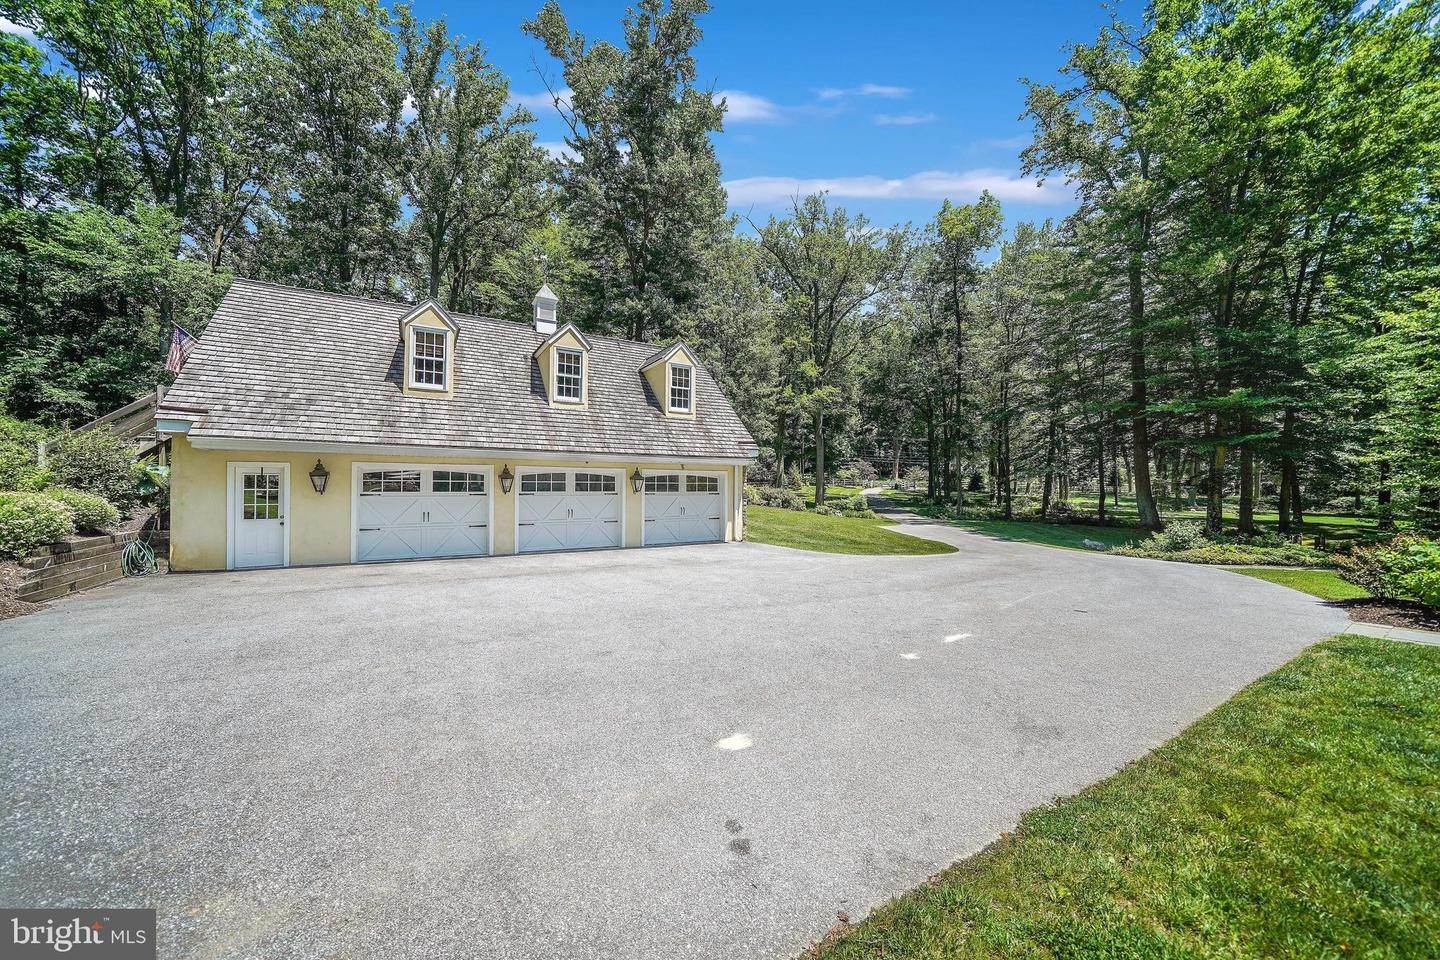 15. Detached House for Sale at 400 DUTTON MILL Road Malvern, Pennsylvania 19355 United States